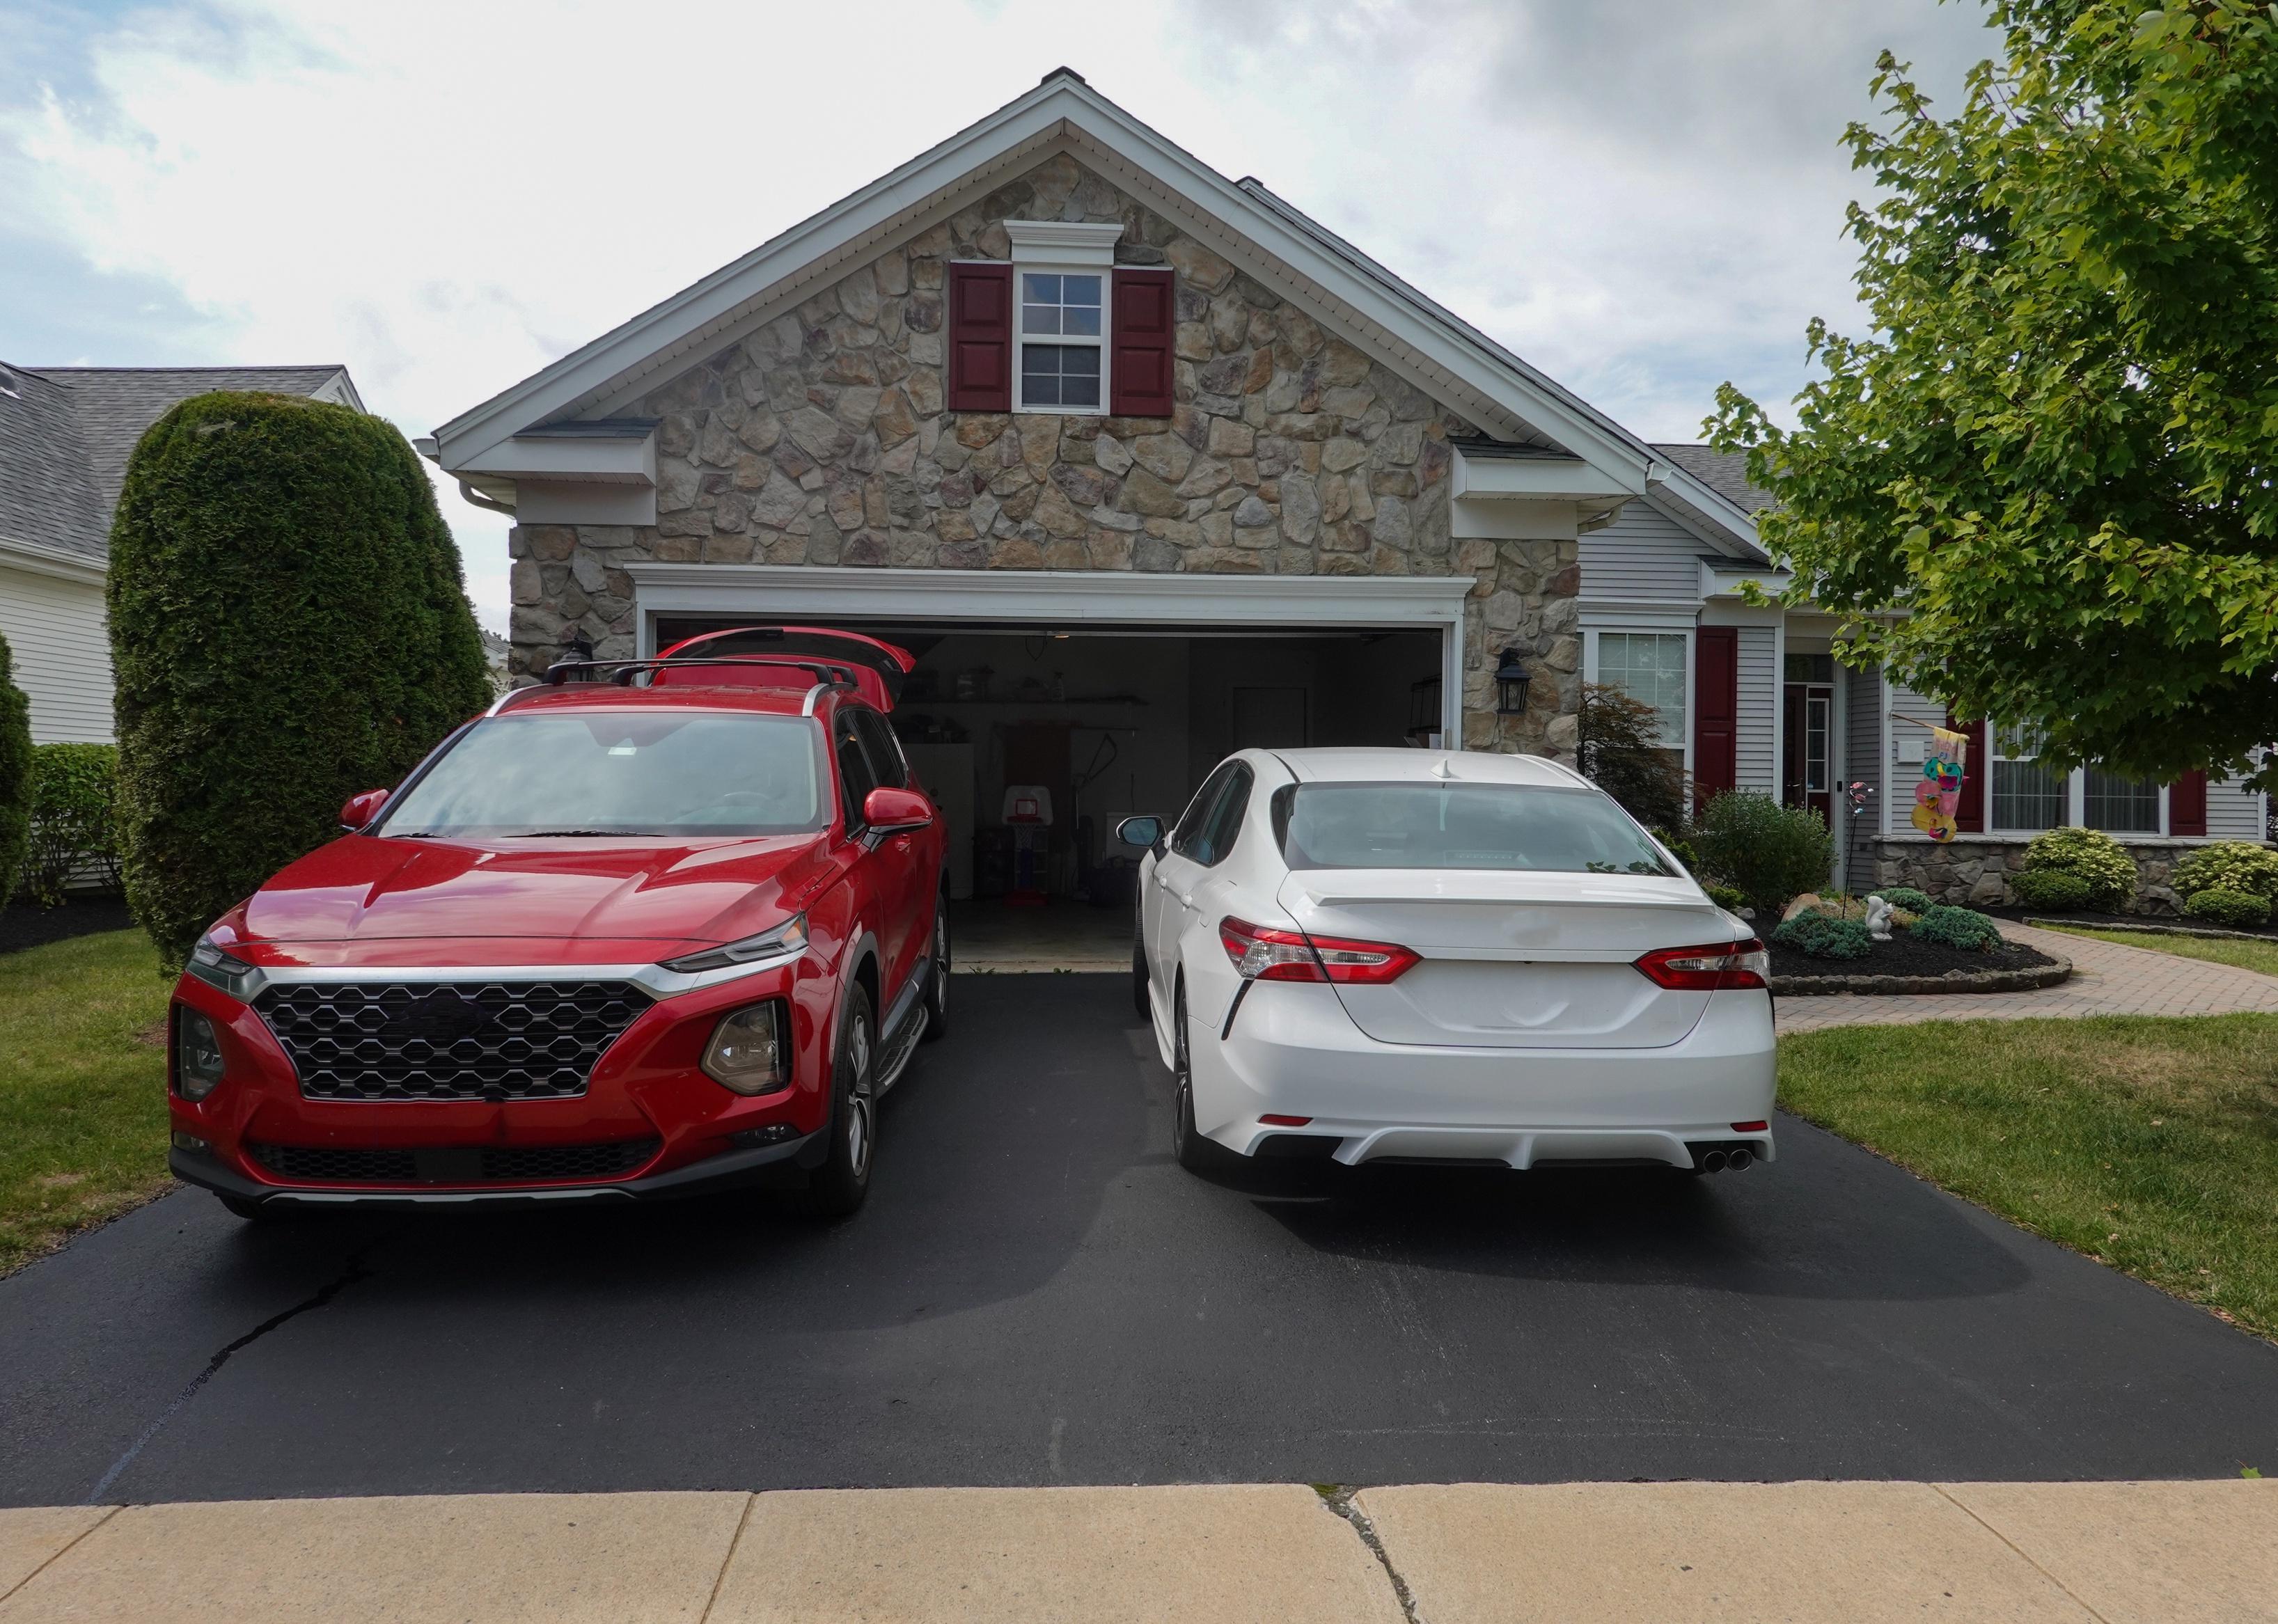 Driveway view of the stone facade of a house with two cars facing in different directions.